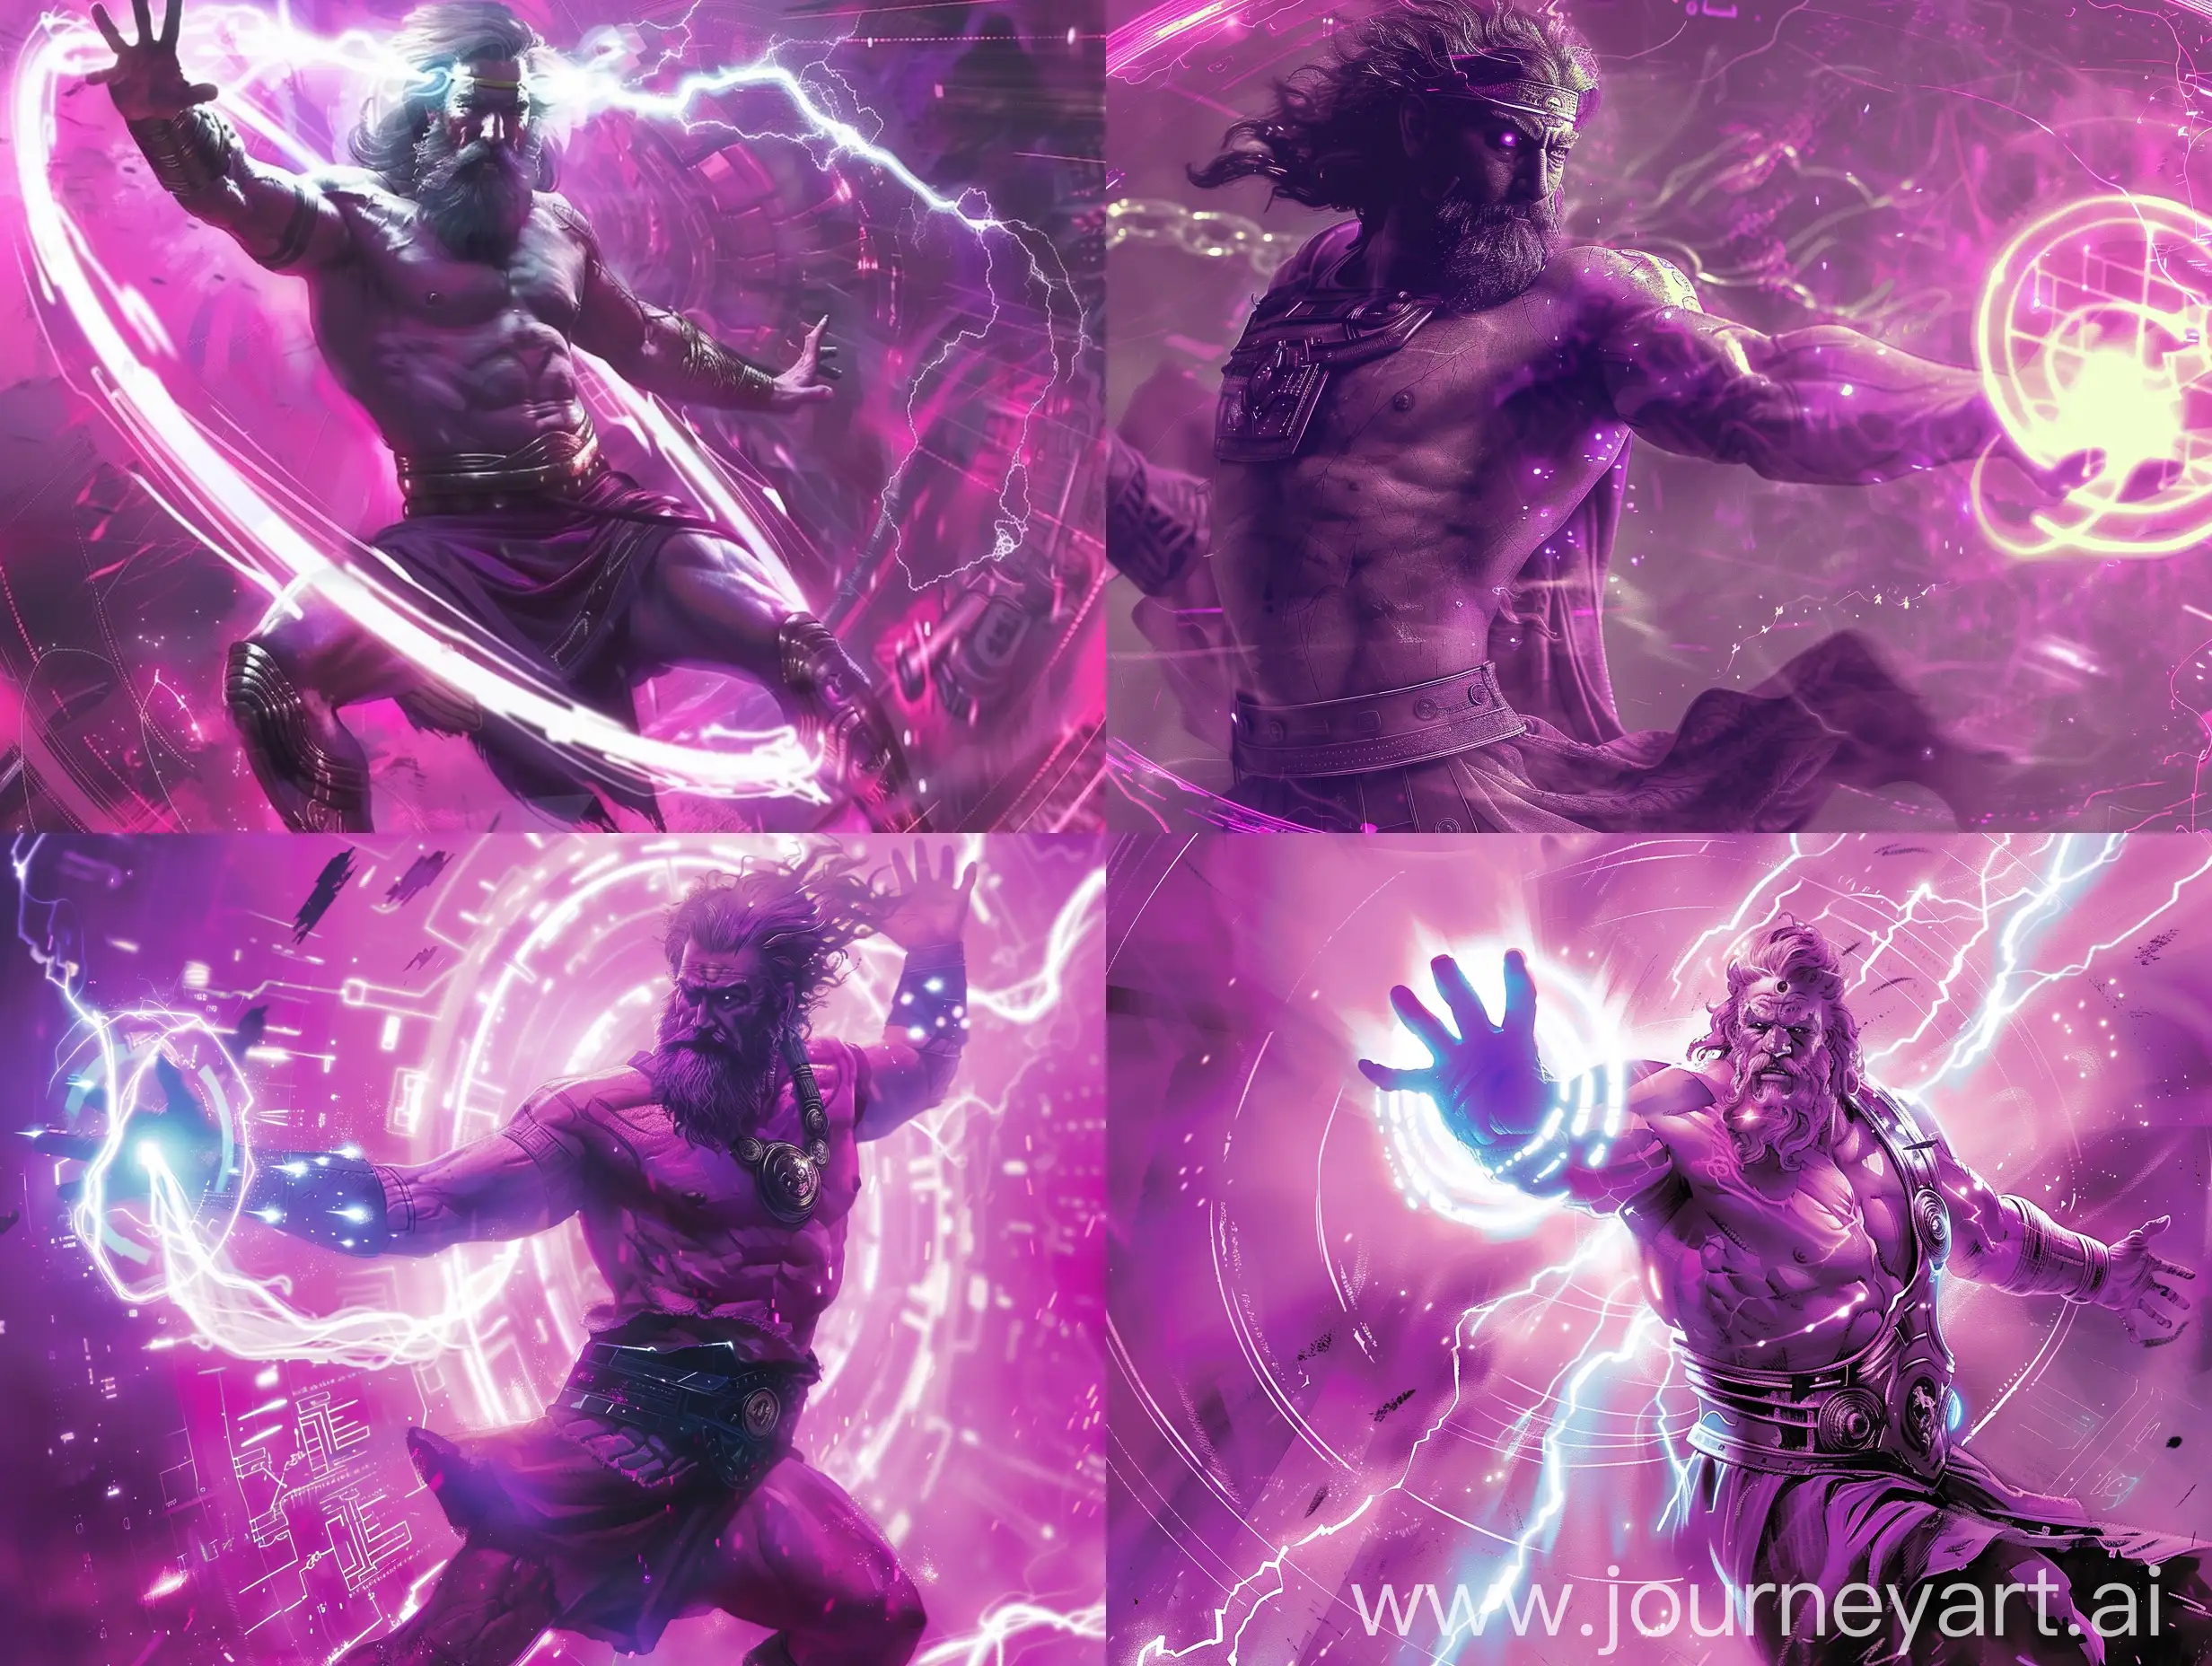 Ancient God Zeus,HD cover,1400x1400px,With lights/energy on his handstand a magenta colour futuristic background, clockwise